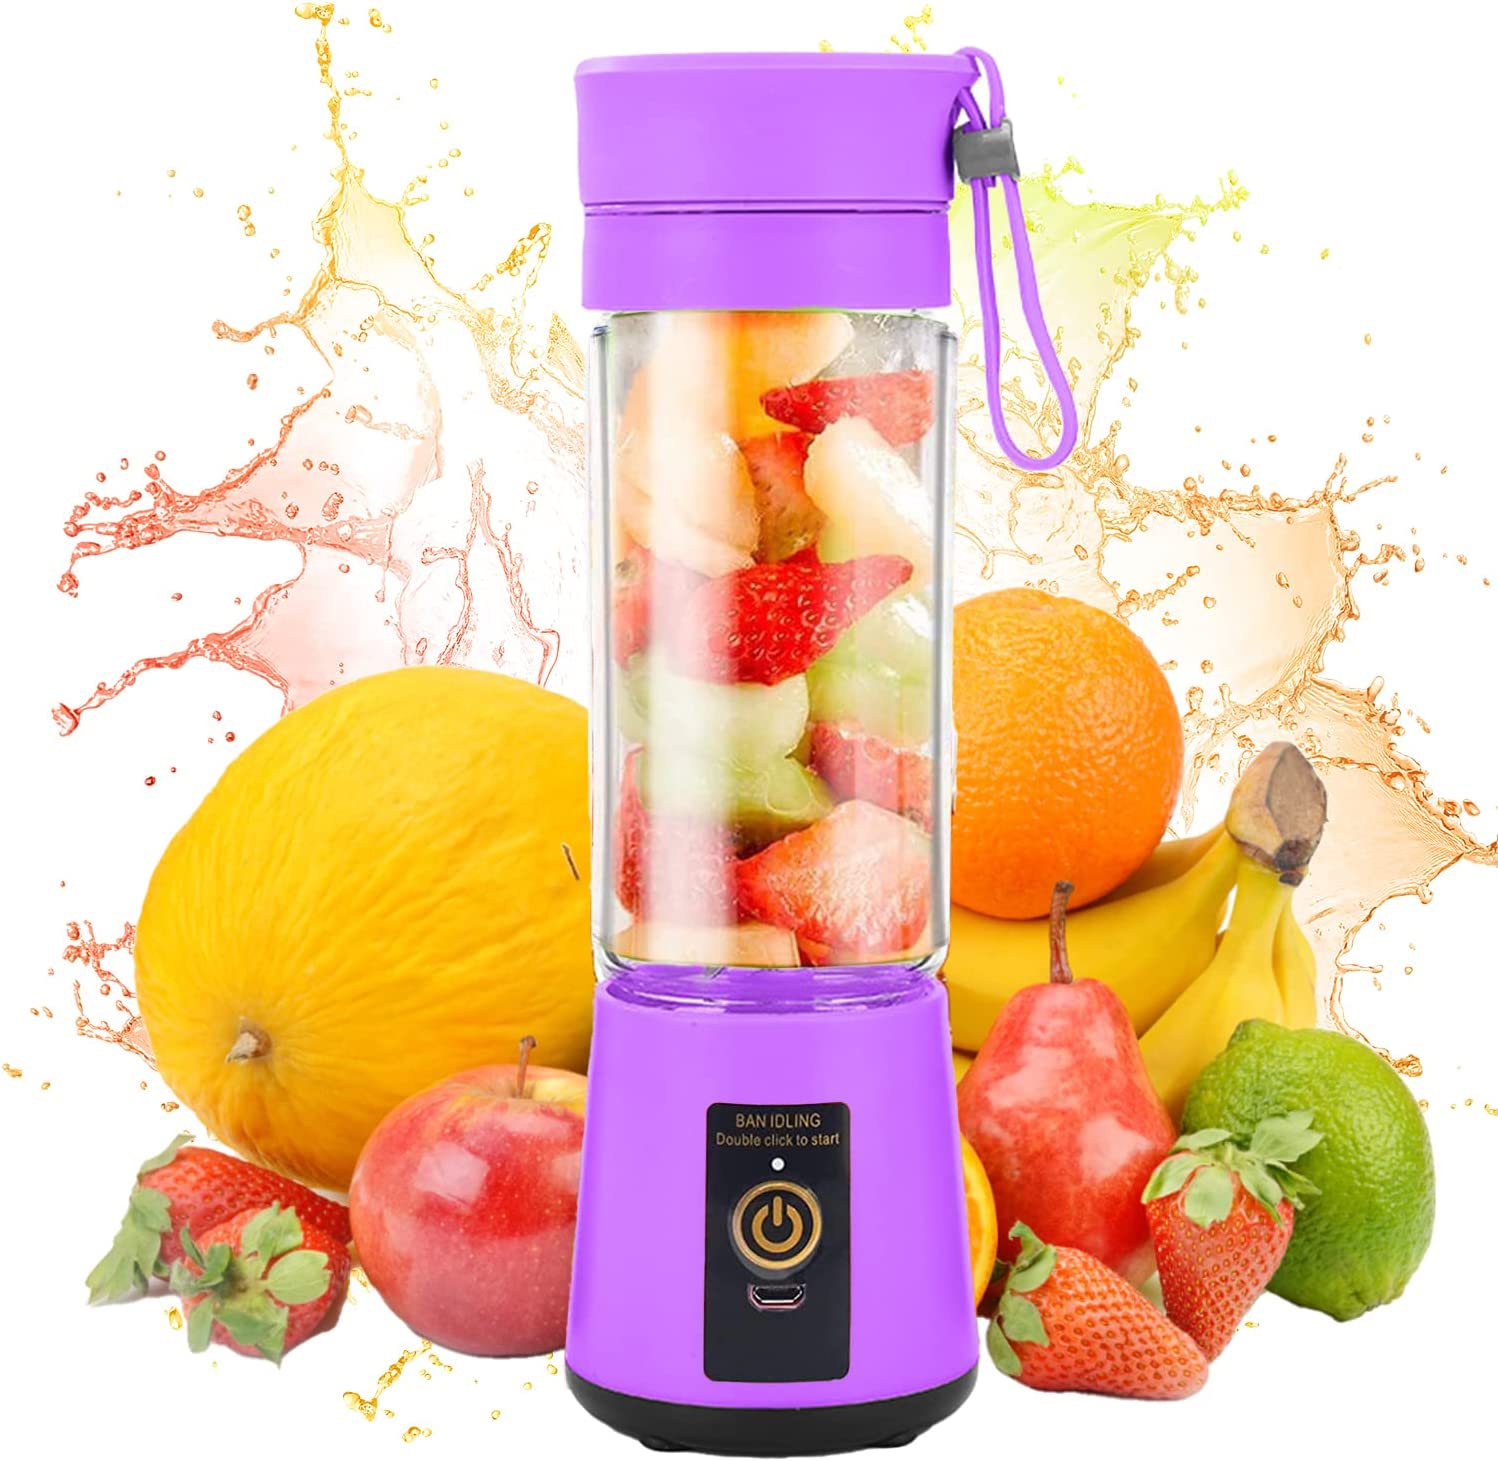 Portable Blender - Rechargeable 6 Sheet Blender Cup | Travel Blender for Fresh Juice Shakes and Smoothies | For Home, Sports, Outdoor, Travel (Purple)